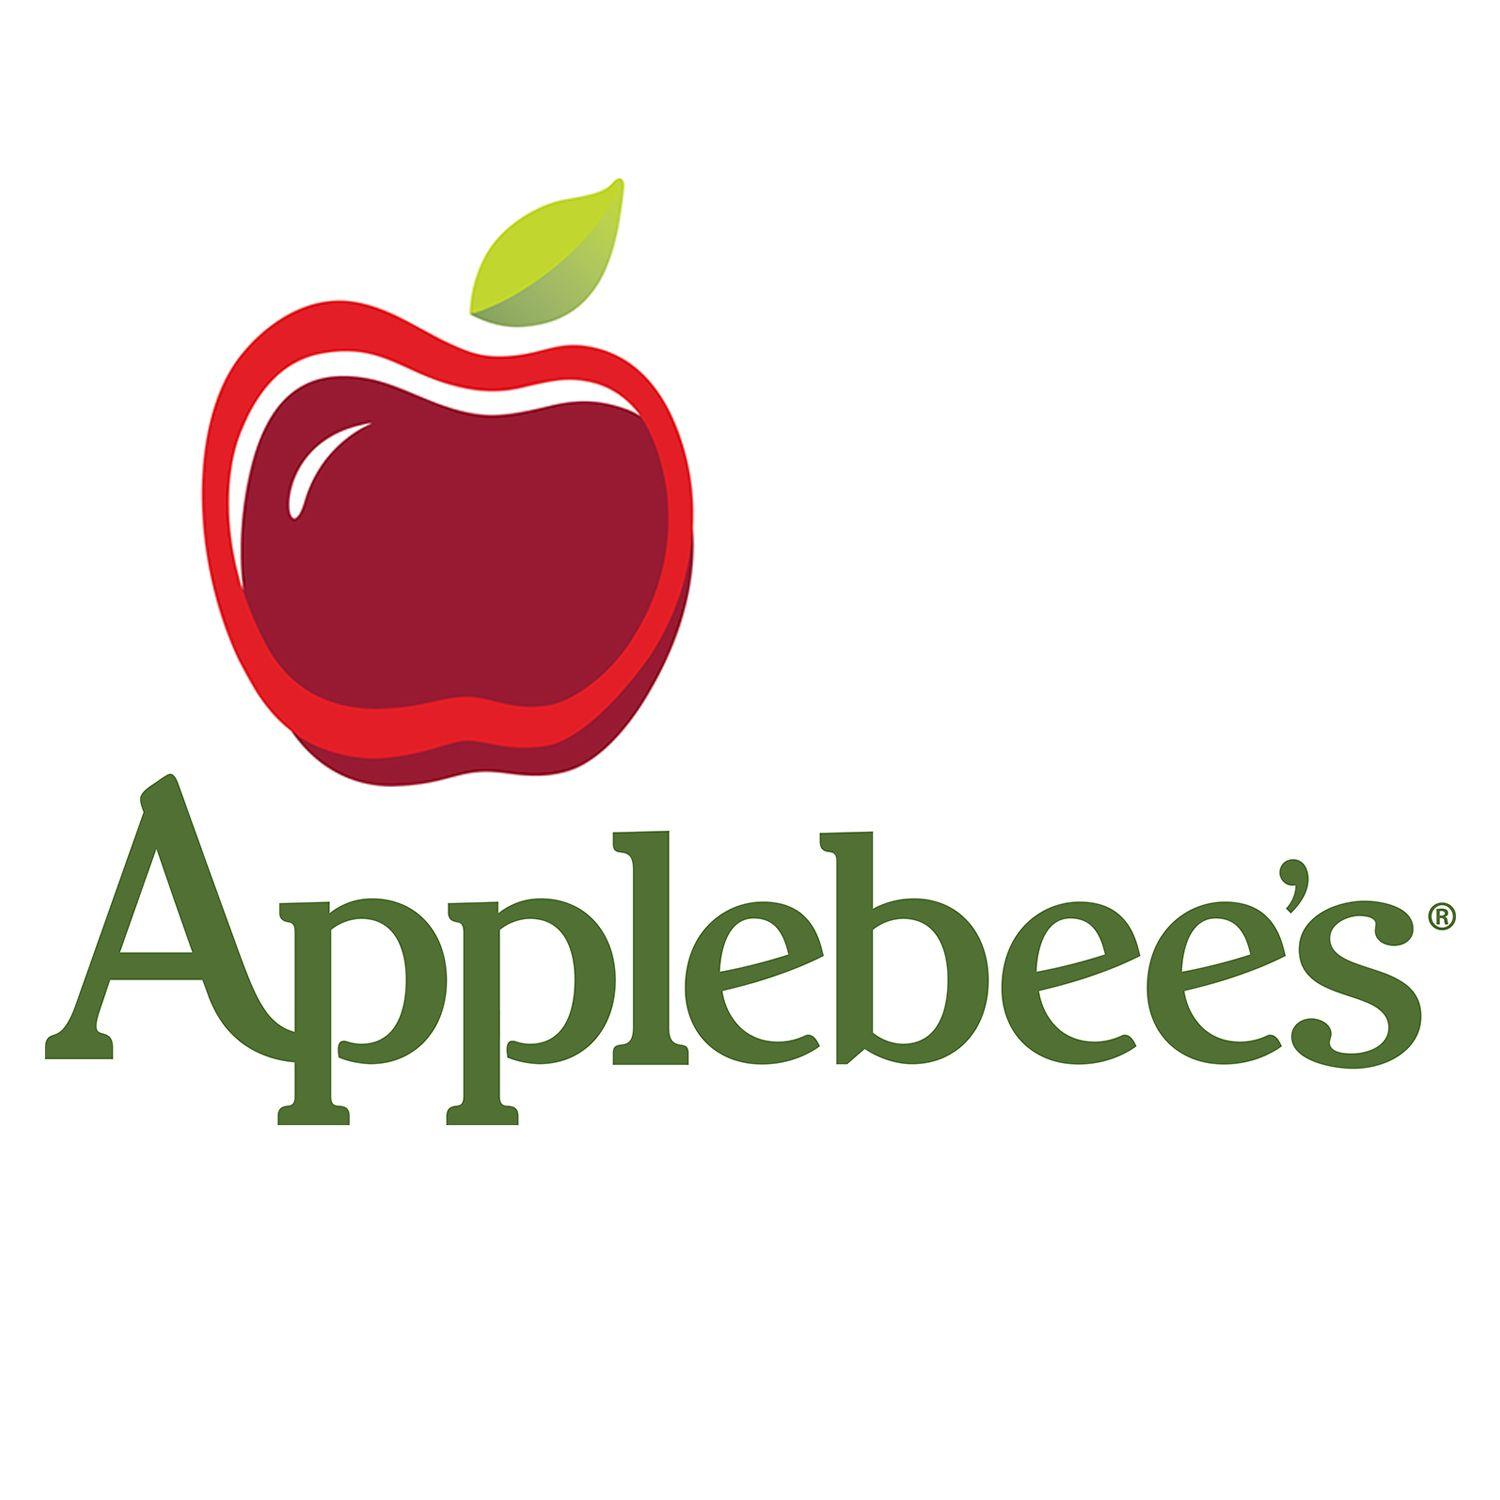 Applebee's Carside Logo - Applebee's Paws for Carside Campaign. Mix 92.9